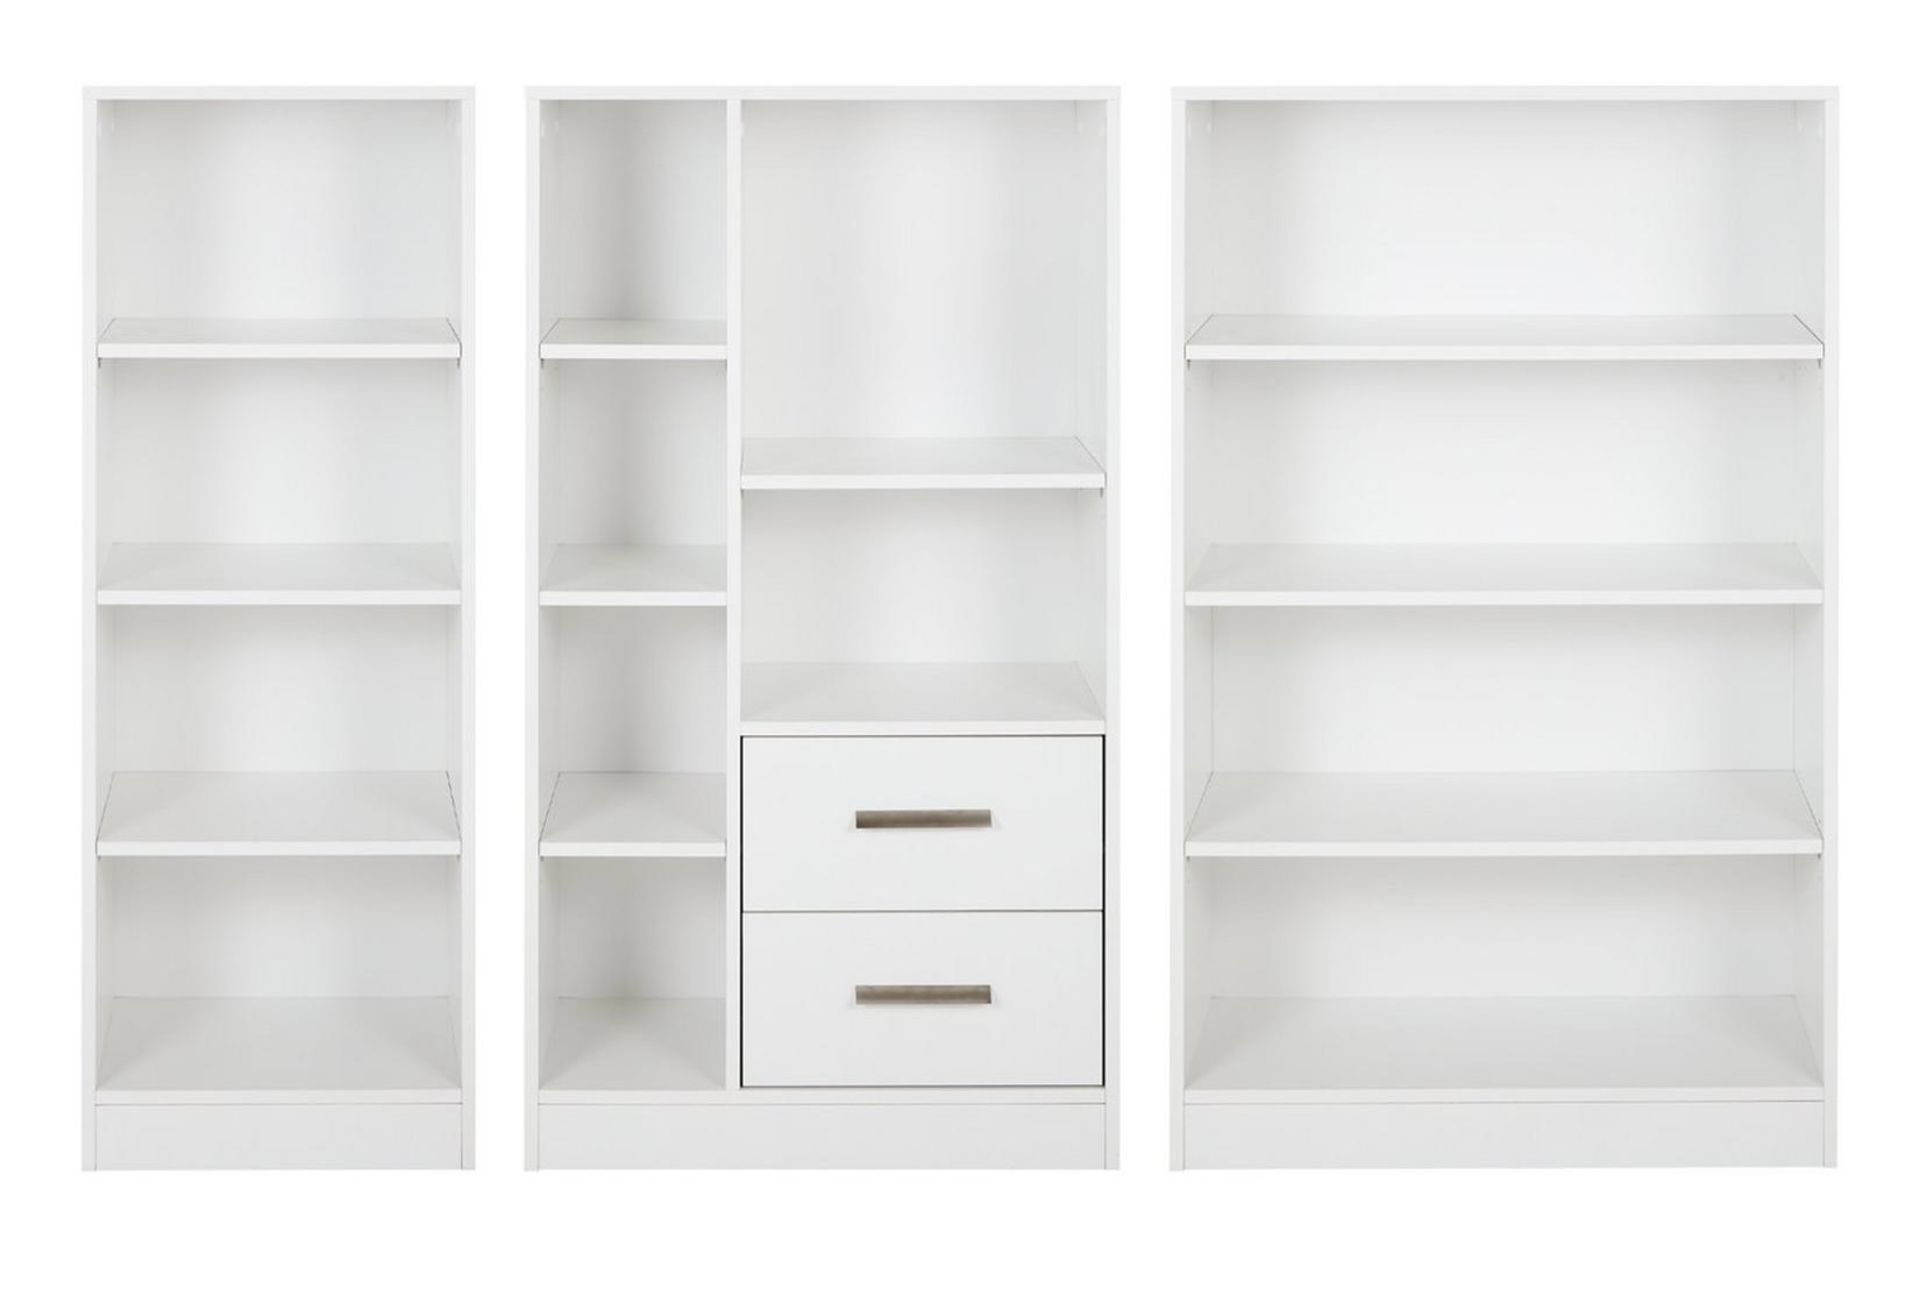 A1 PRODUCT NEW - METRO 3 PIECE STORGAGE BOOKCASE SET IN WHITE - RRP Ã‚Â£189 - Image 2 of 5